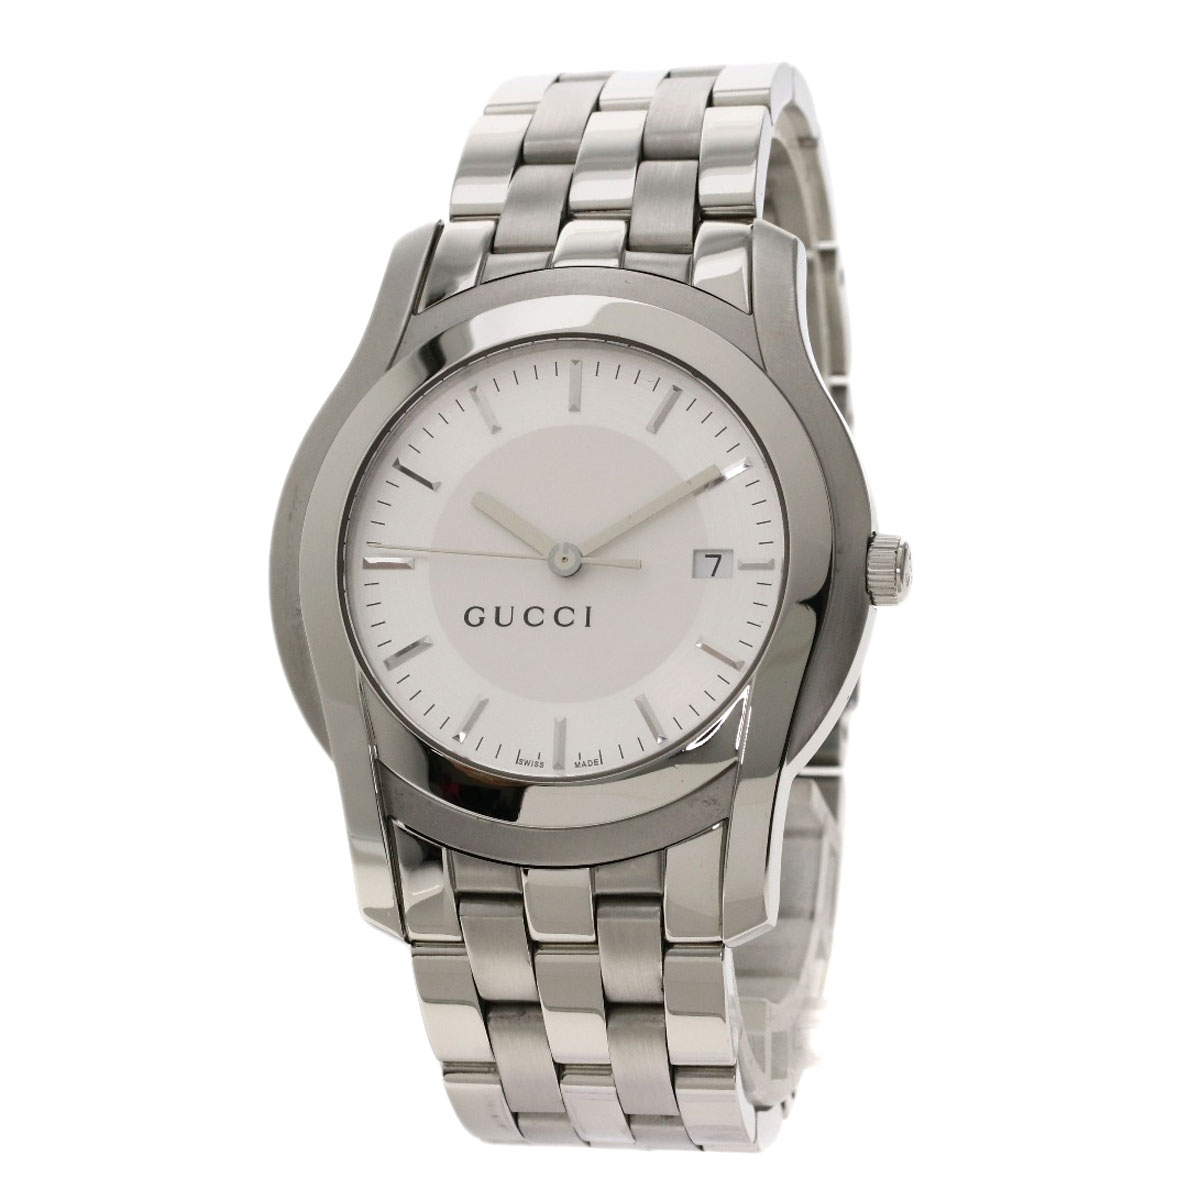 GUCCI Round face Watches 5500XL Stainless Steel/Stainless Steel mens | eBay